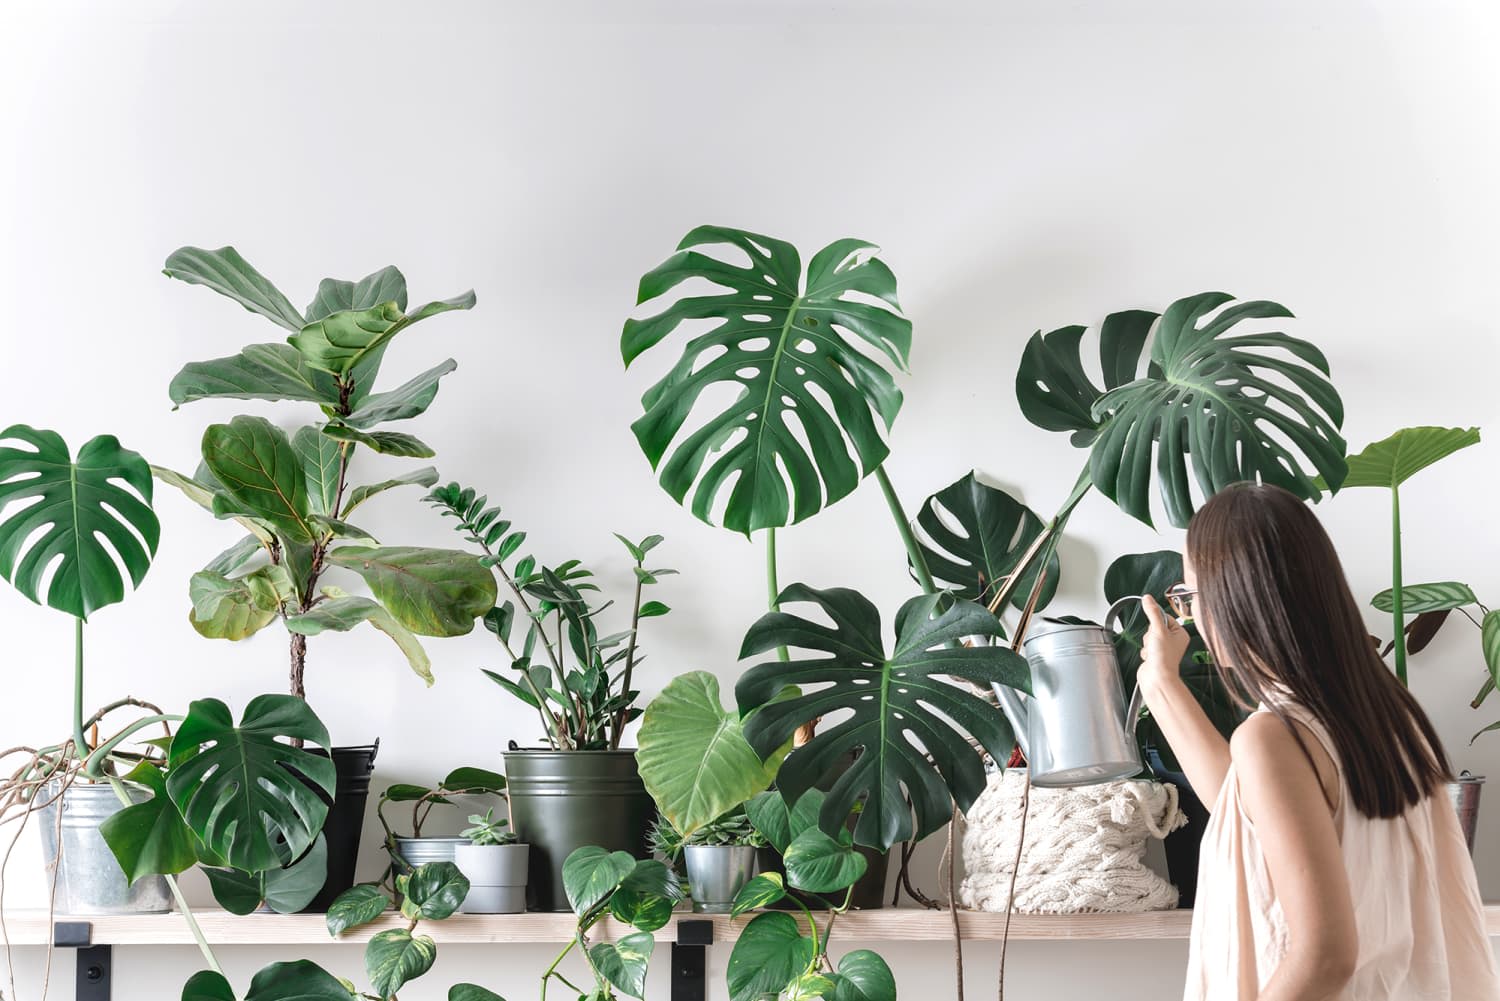 These Are the 9 Most Popular Houseplants on Instagram, According to Survey